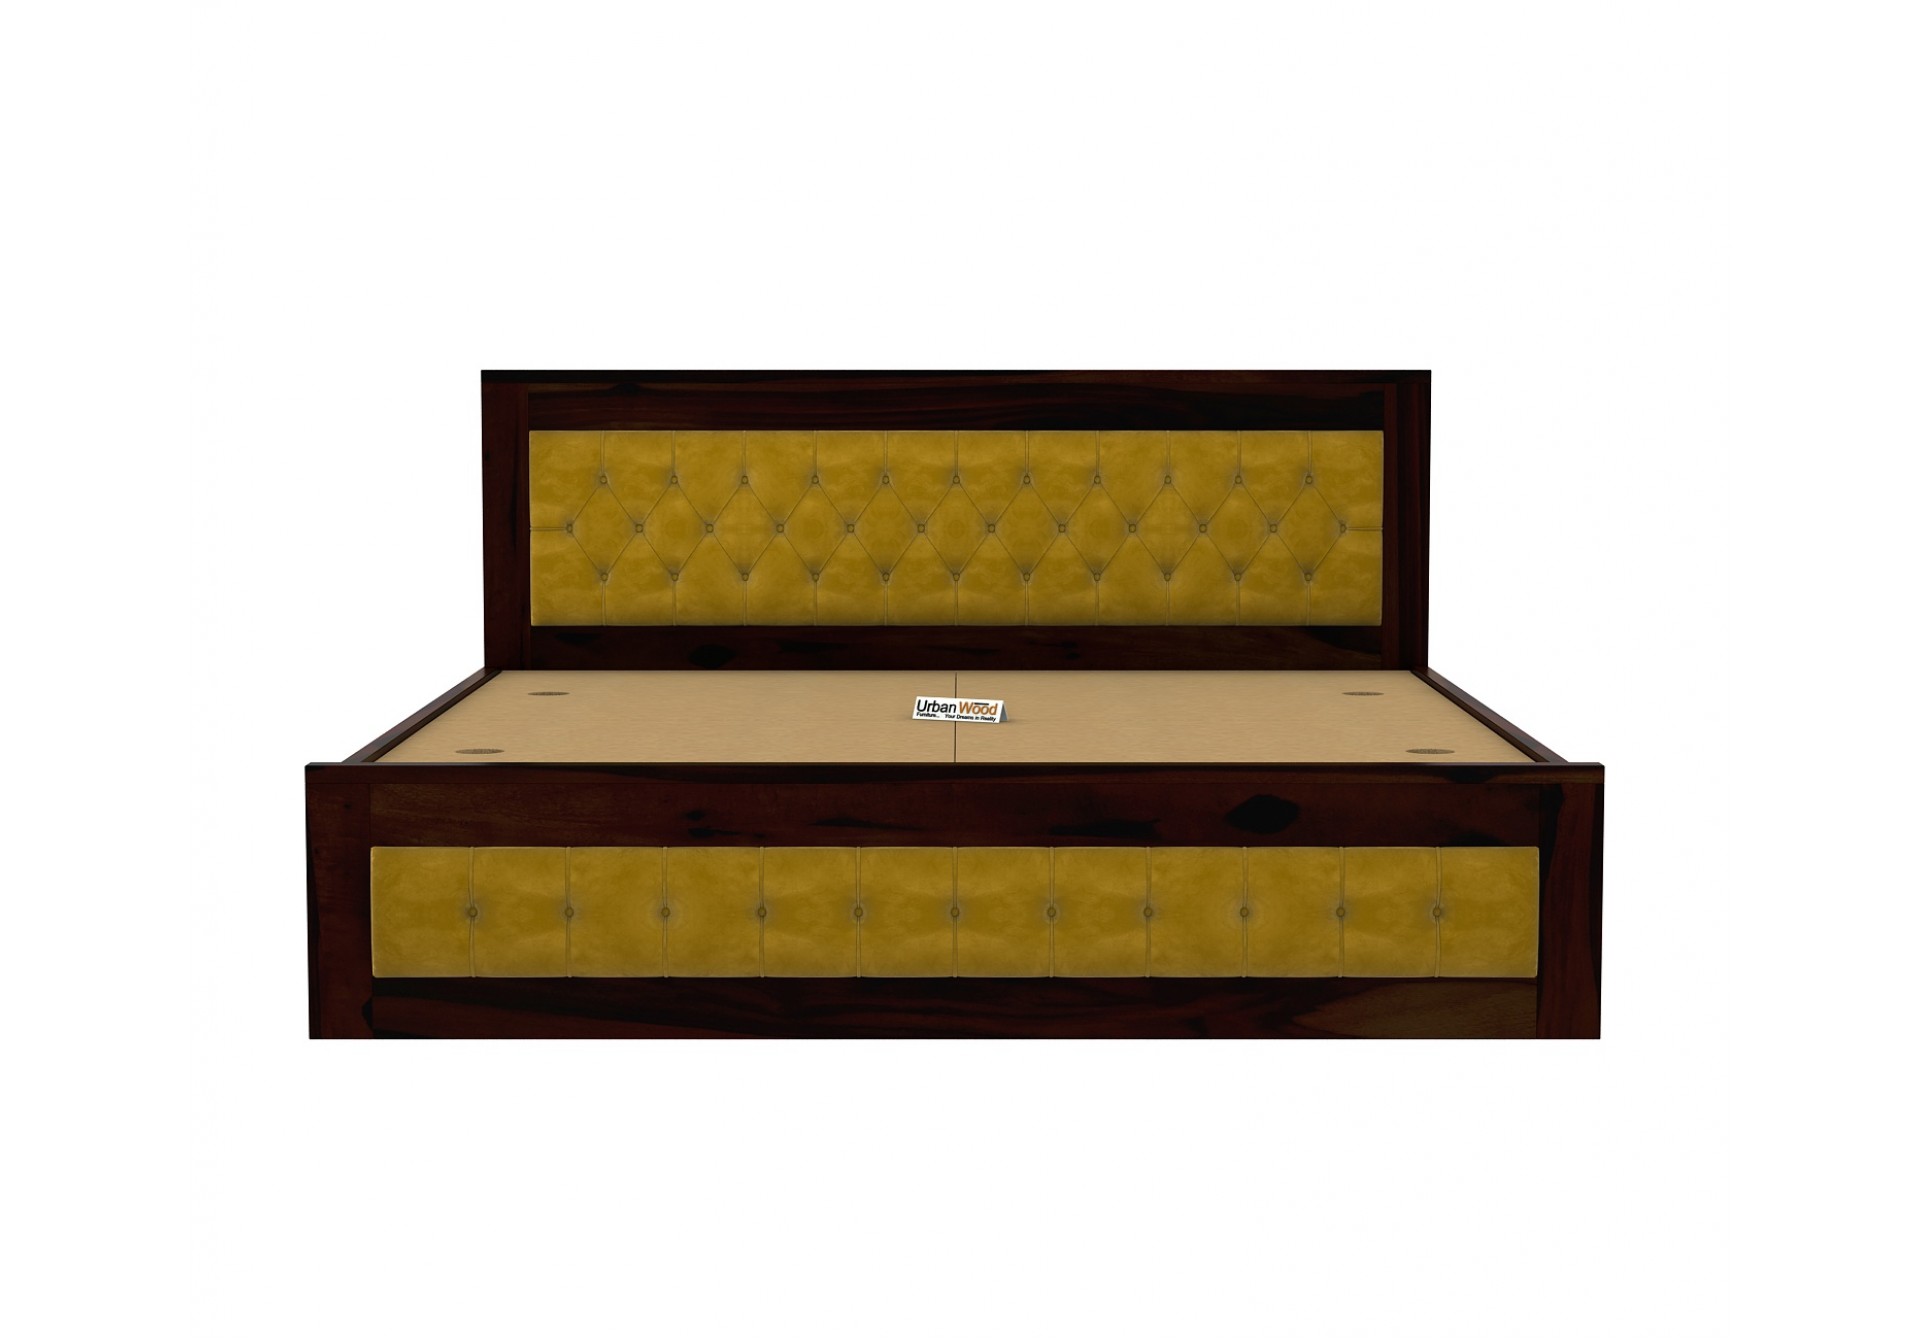 Jolly Wooden Bed with Box Storage ( Queen Size, Walnut Finish )